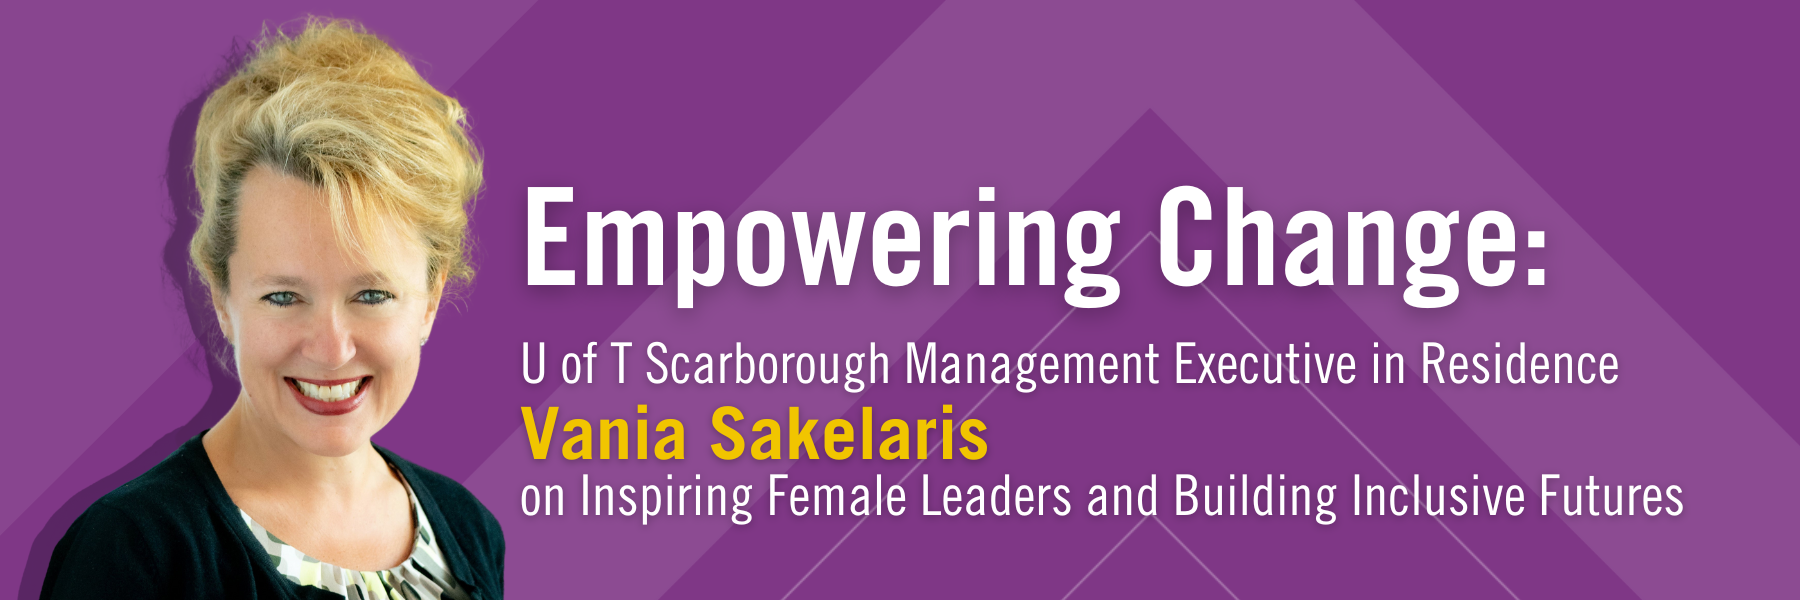 Vania's headshot with the text Empowering Change: UTSC Executive in residence Vania Sakelaris on Inspiring Female Leaders and Building Inclusive Futures